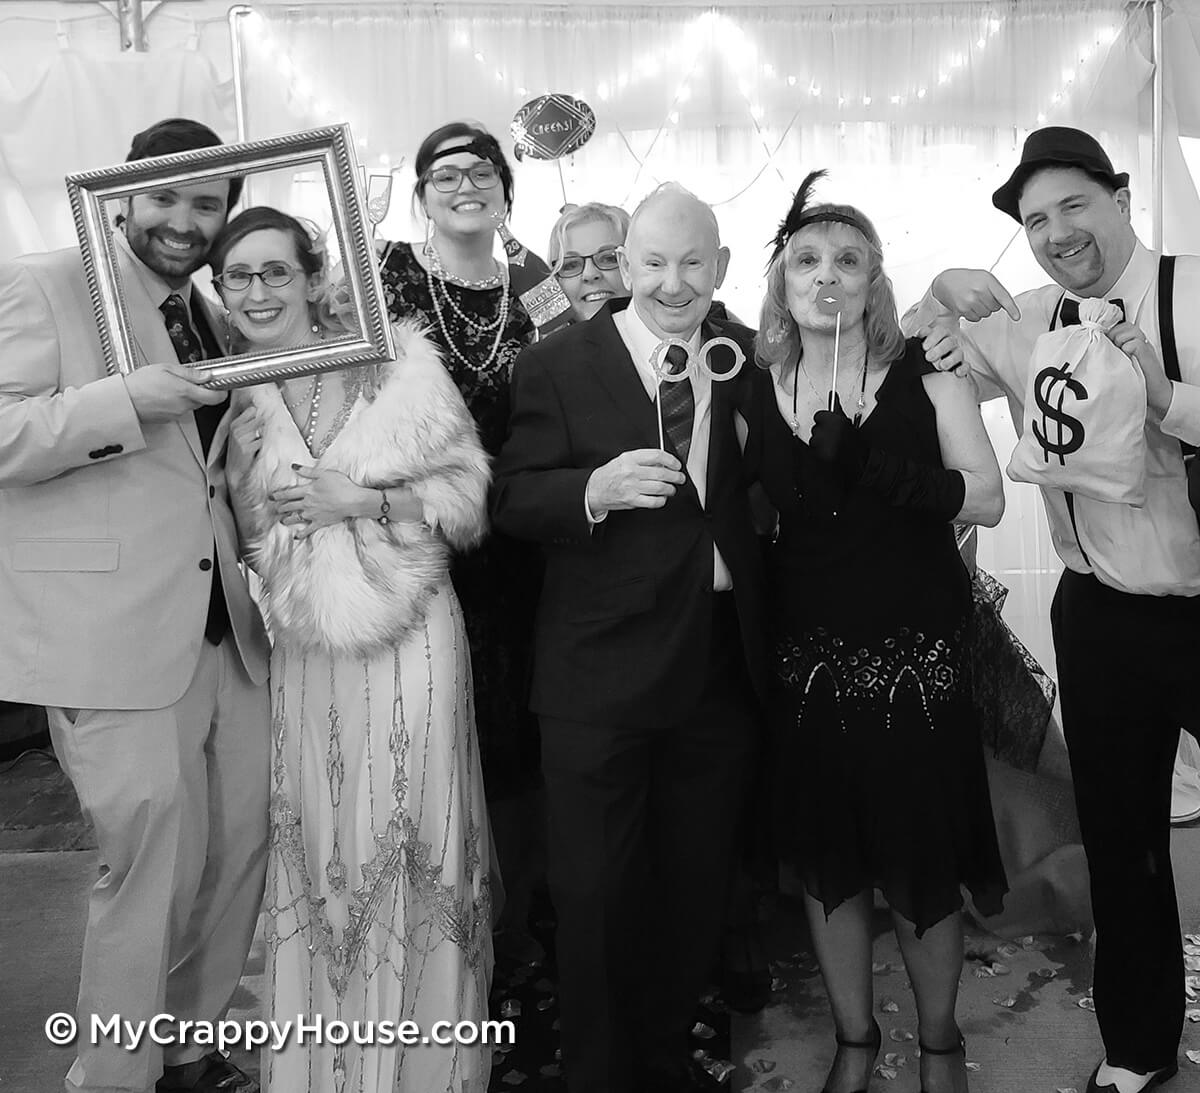 1920s theme wedding group picture with props